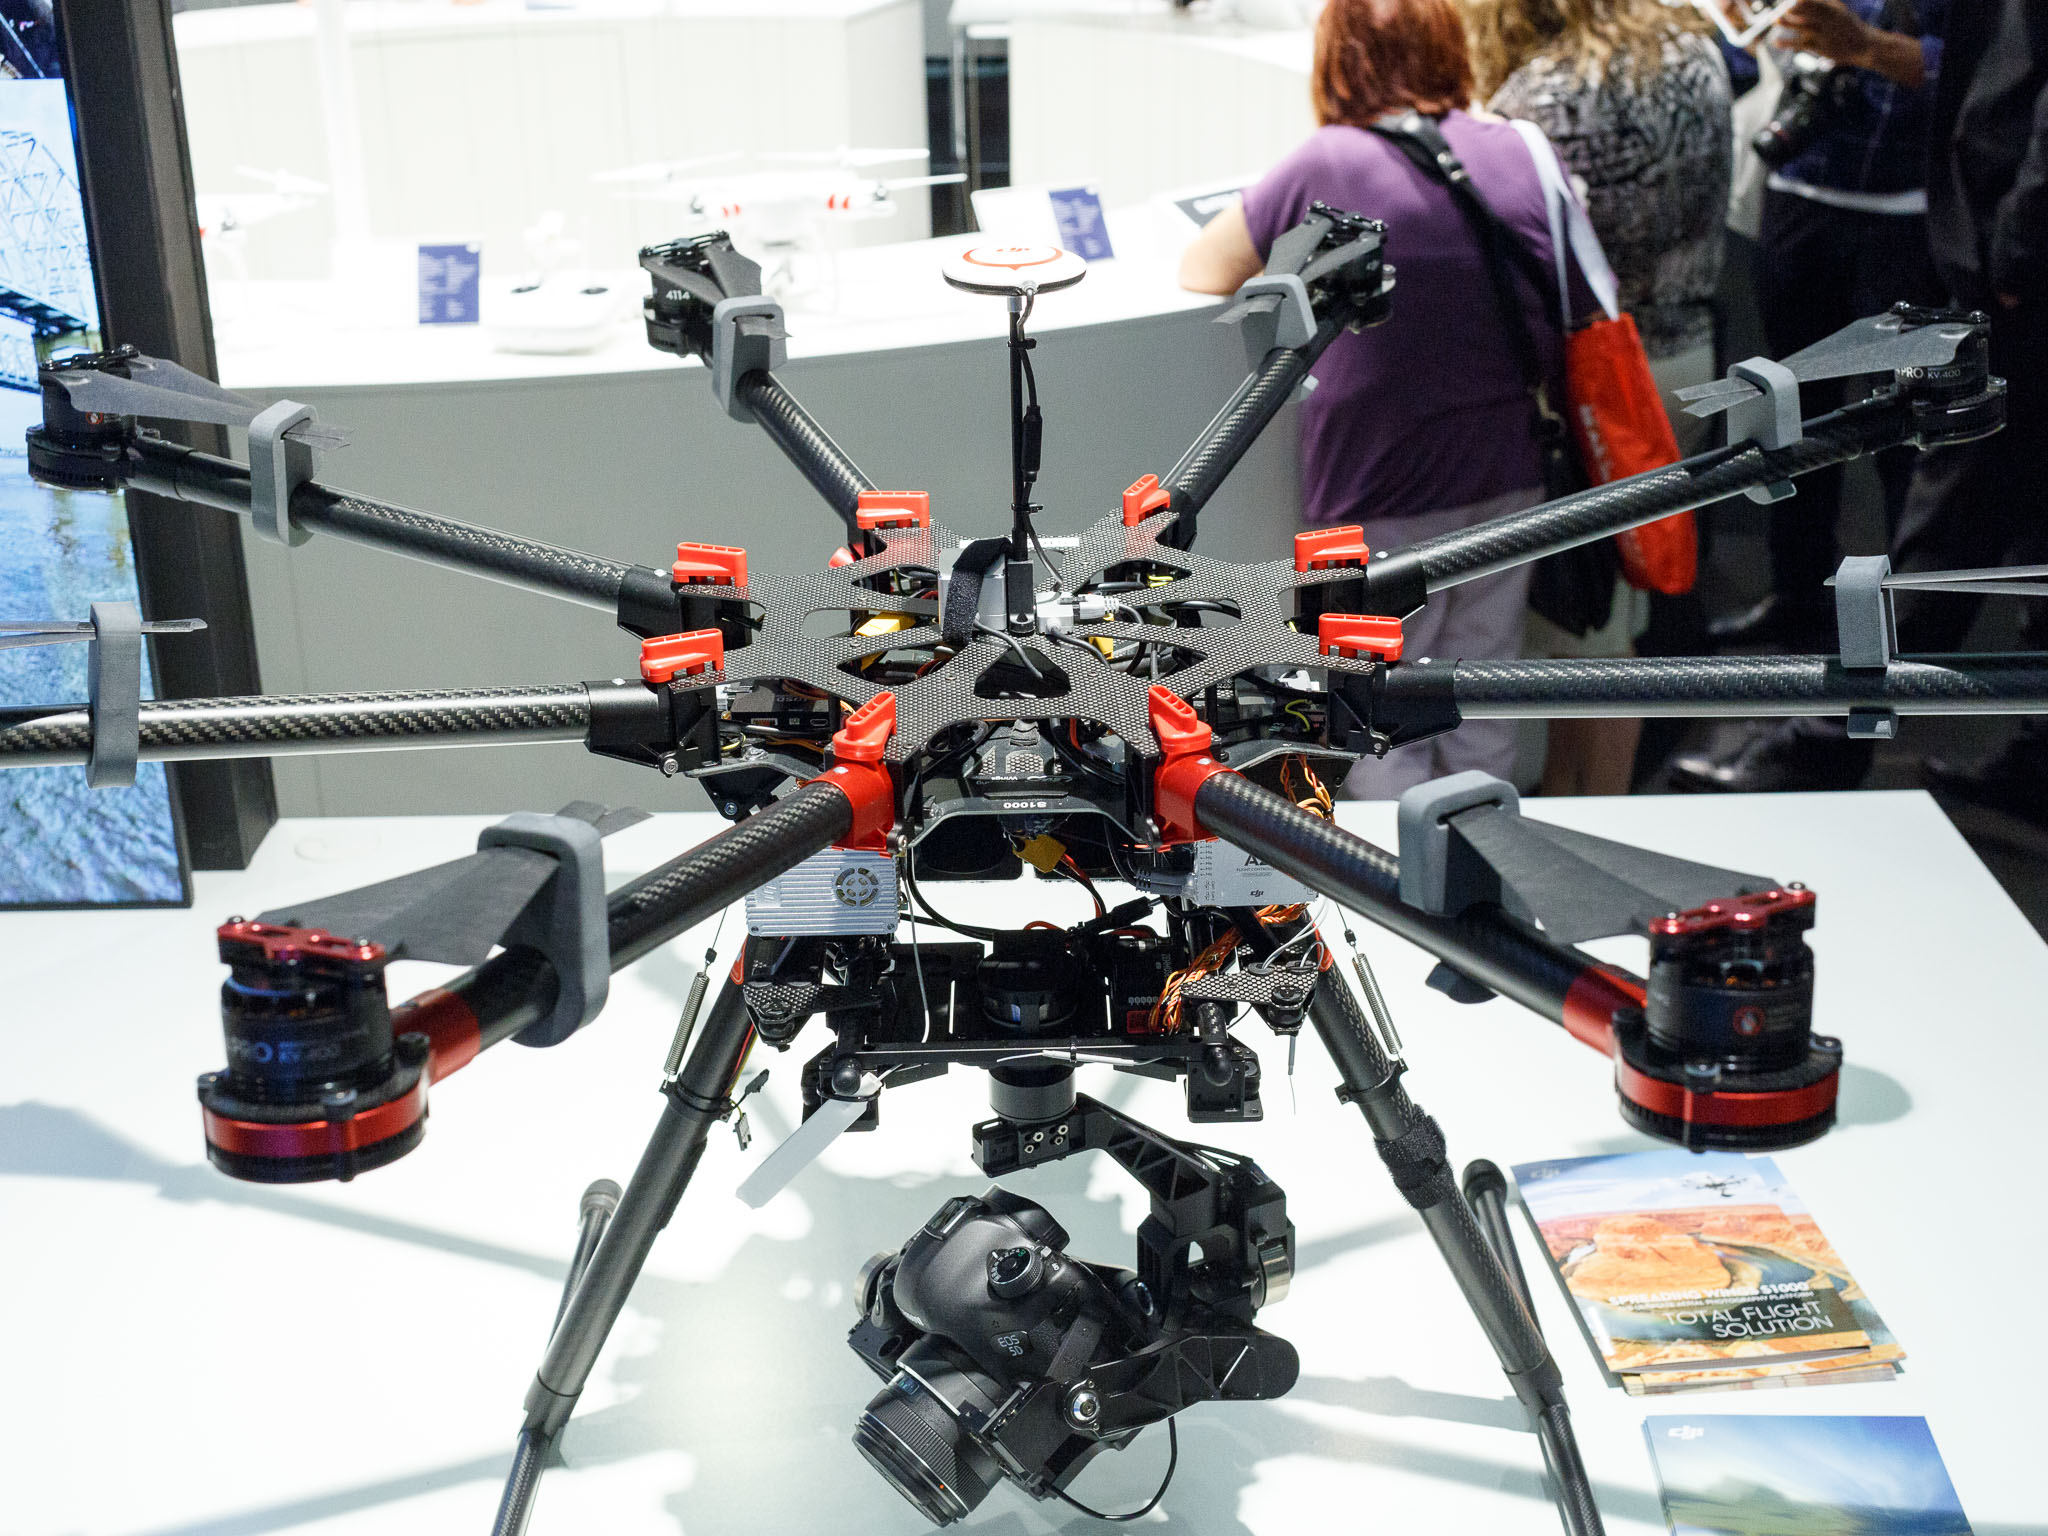 Drones like this DJI S1000, which can carry a big SLR camera on a motion-stabilized rig, could get a lot more use if the FAA loosens restrictions against commercial use of the aircraft.